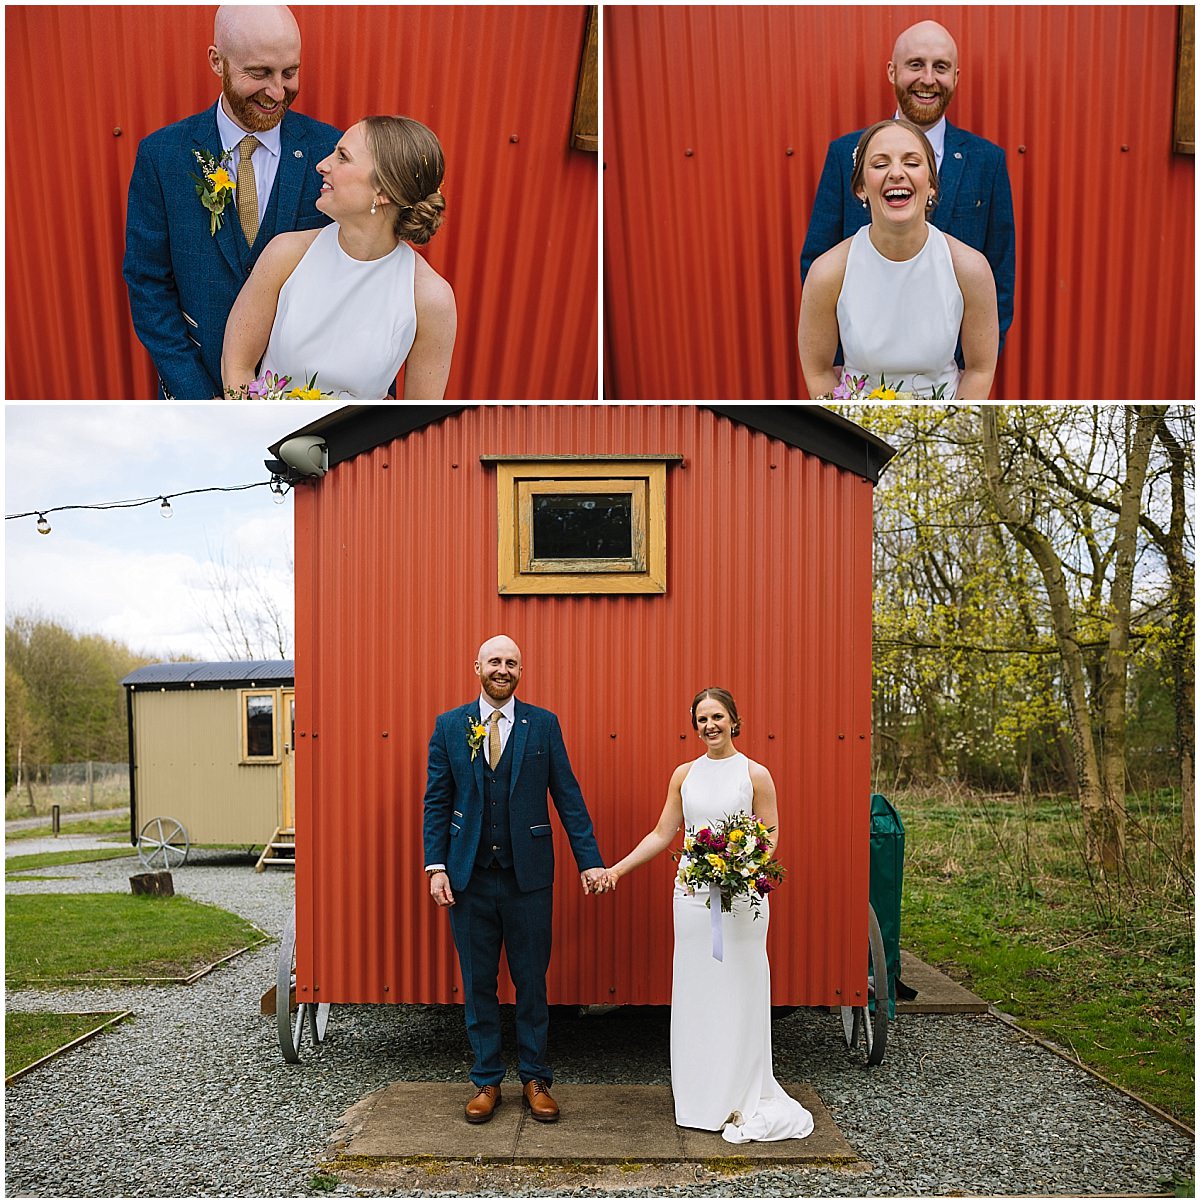 A collage of two wedding photos featuring a smiling couple. In the top image, the bride and groom are looking at each other with the groom slightly behind the bride against a red background. In the bottom image, they stand hand in hand in front of a small red cabin with the groom to the left and the bride to the right holding a bouquet, both smiling towards the camera.